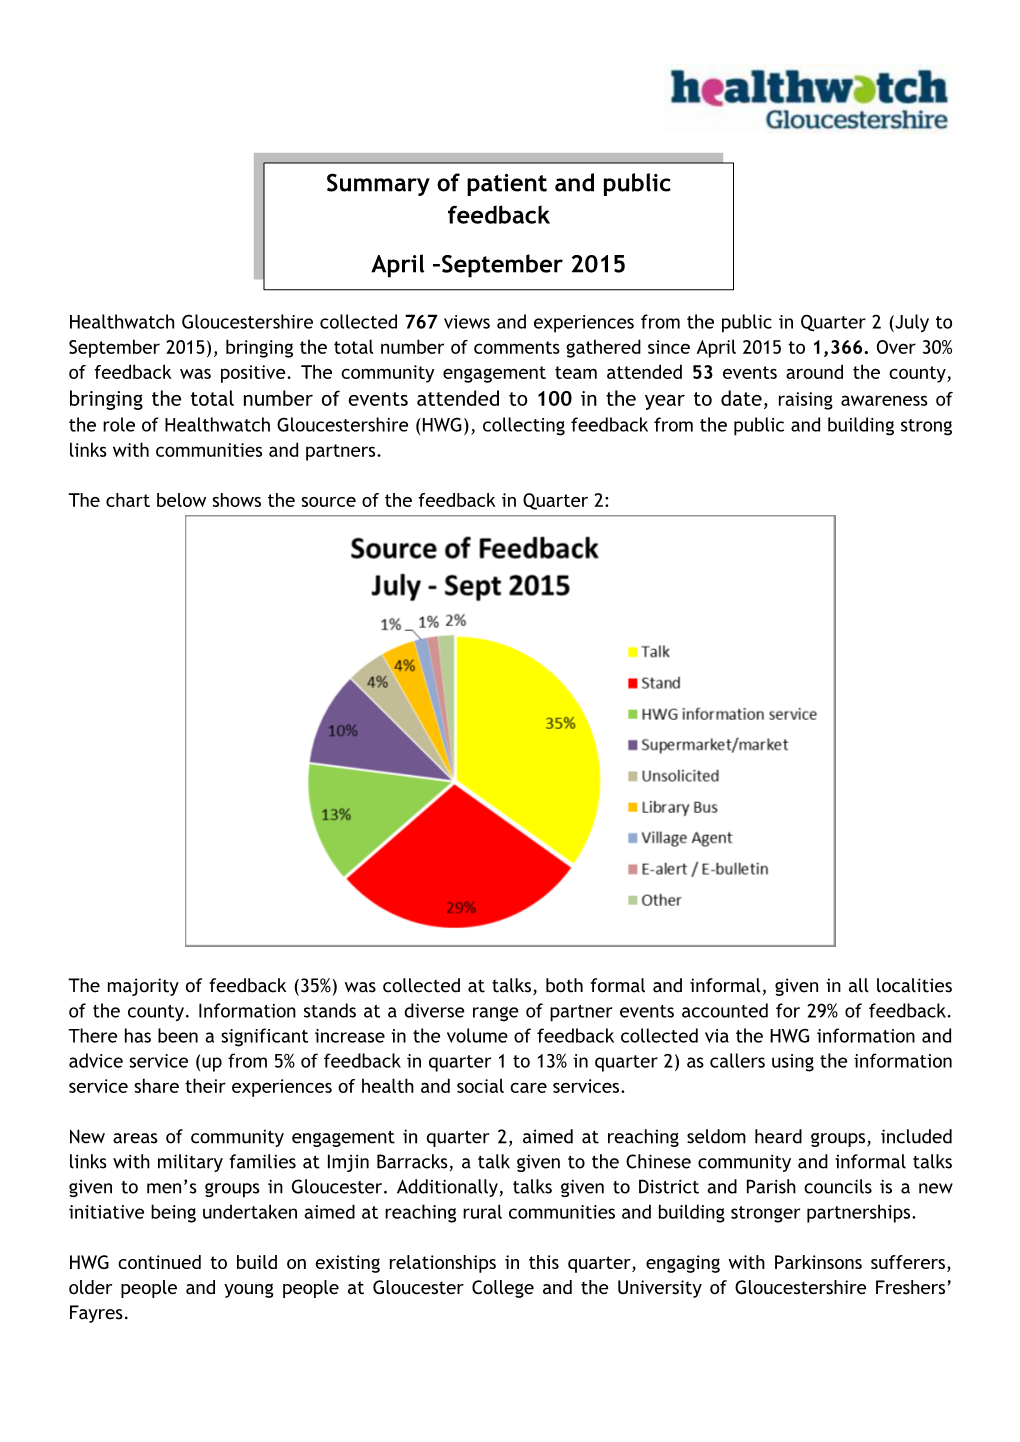 Summary of Patient and Public Feedback April –September 2015